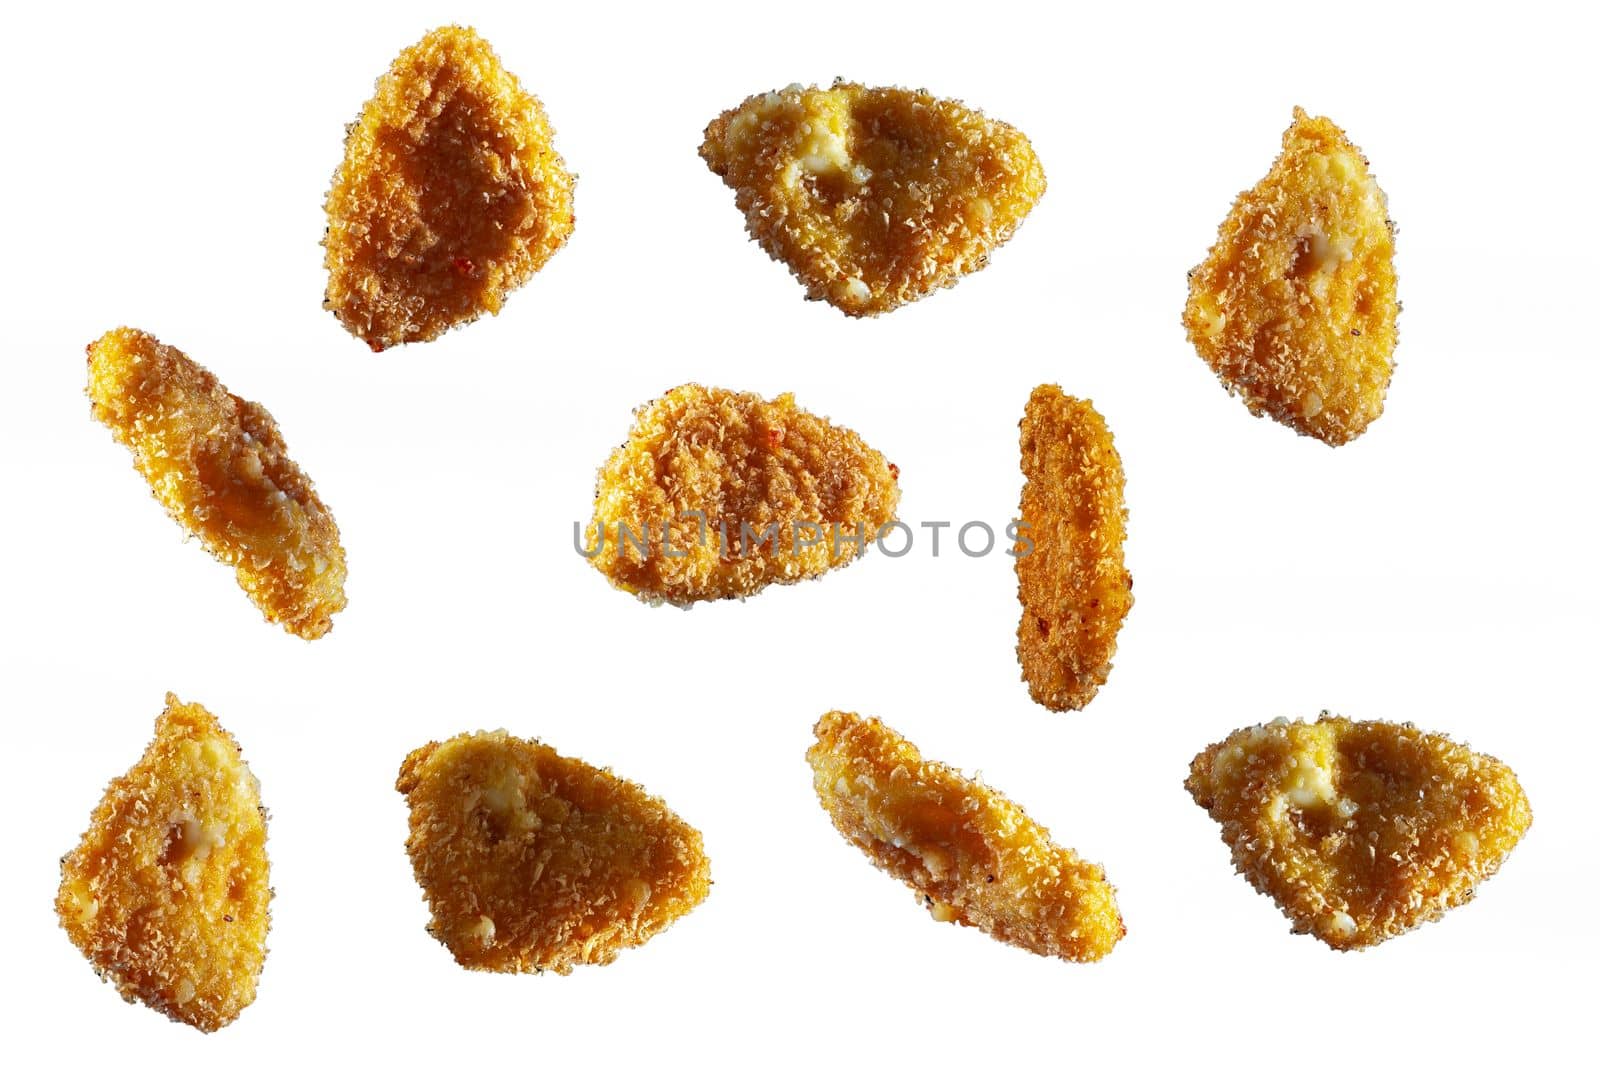 Flying food. chicken nuggets on a white background. Fried chicken in batter. Isolate.